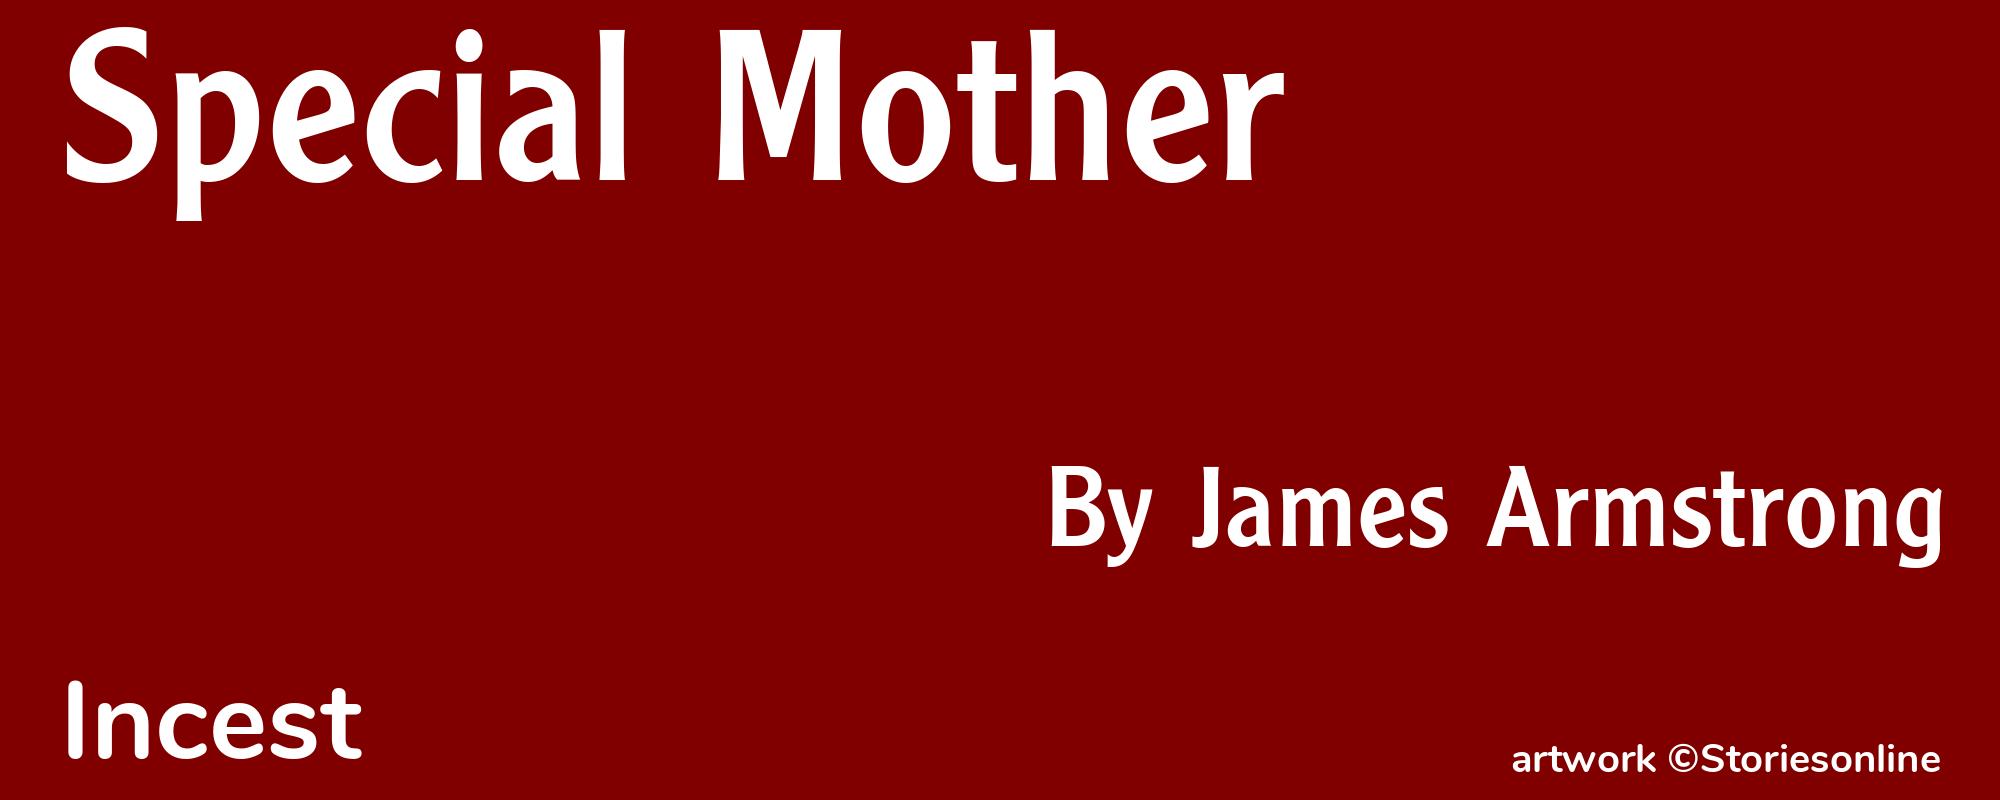 Special Mother - Cover